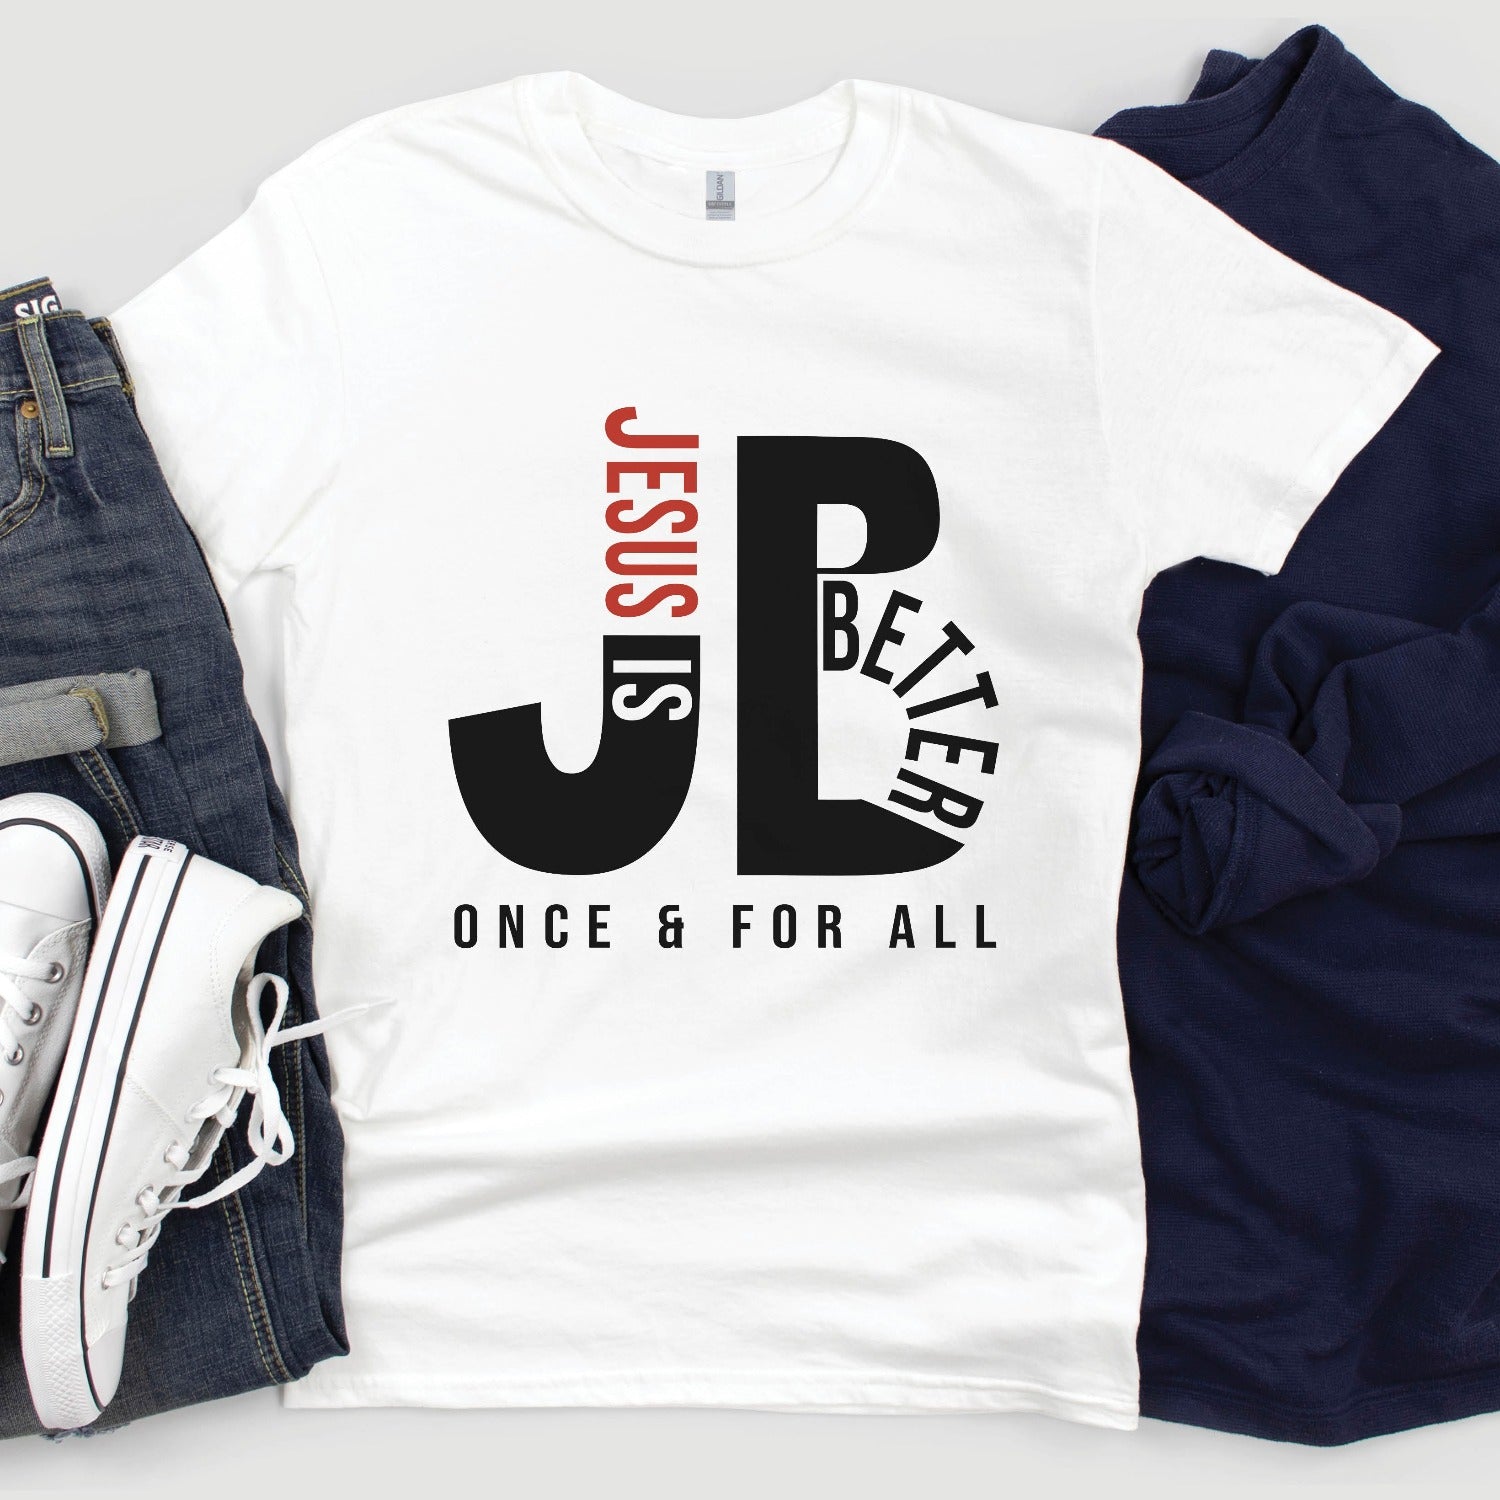 "JB" typography "Jesus is Better Once and For All" design in black and red letters, based on the Christian bible book of Hebrews, printed on a white color Unisex t-shirt, created for faith-based men and women, great father's day gift for dad